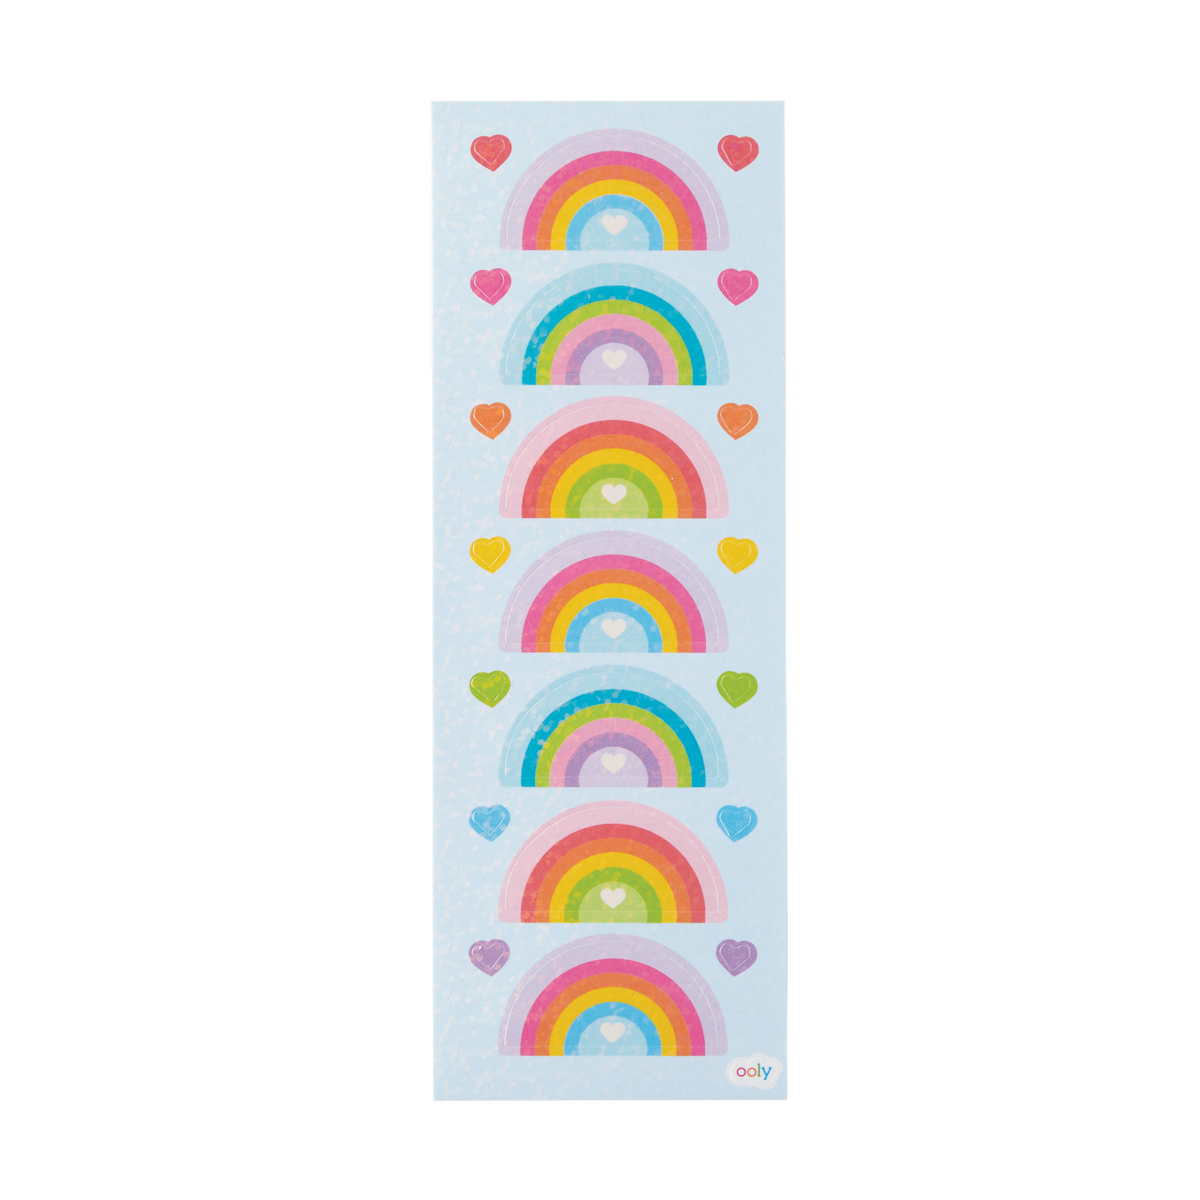 Heart to Heart Stacking Crayons - Classroom Bundle